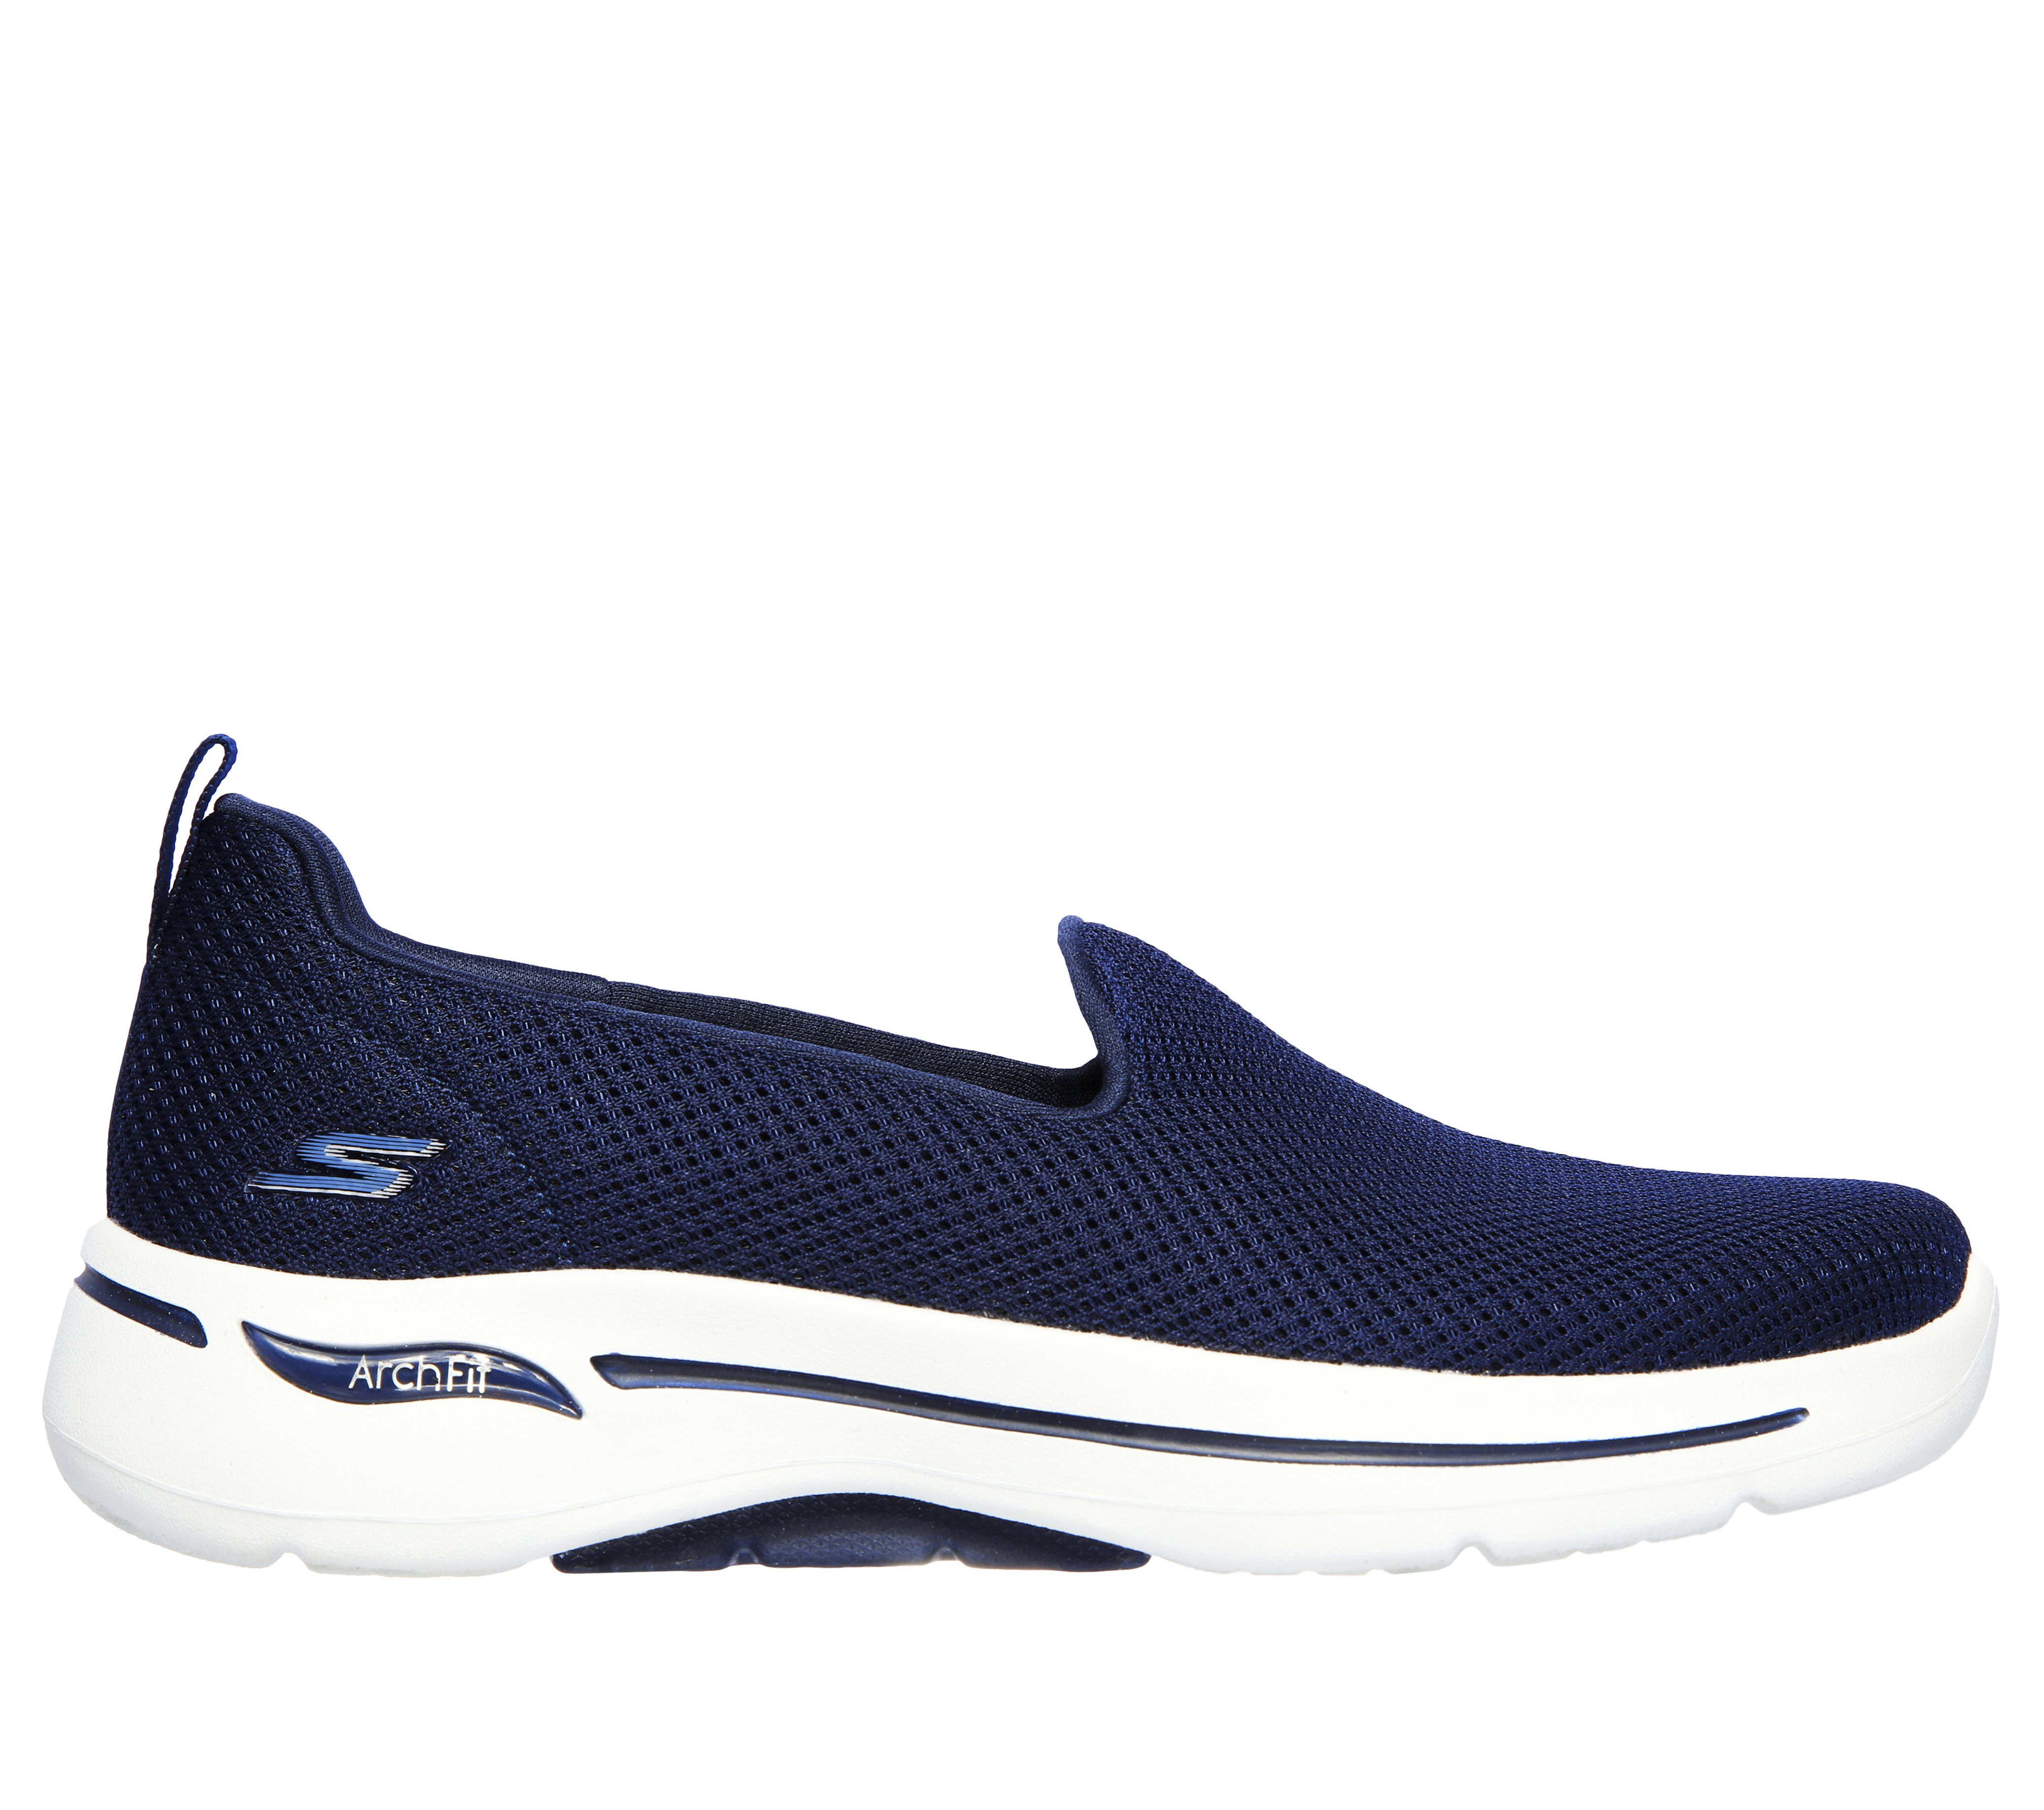 What Stores Carry Skechers Go Walk? - Shoe Effect